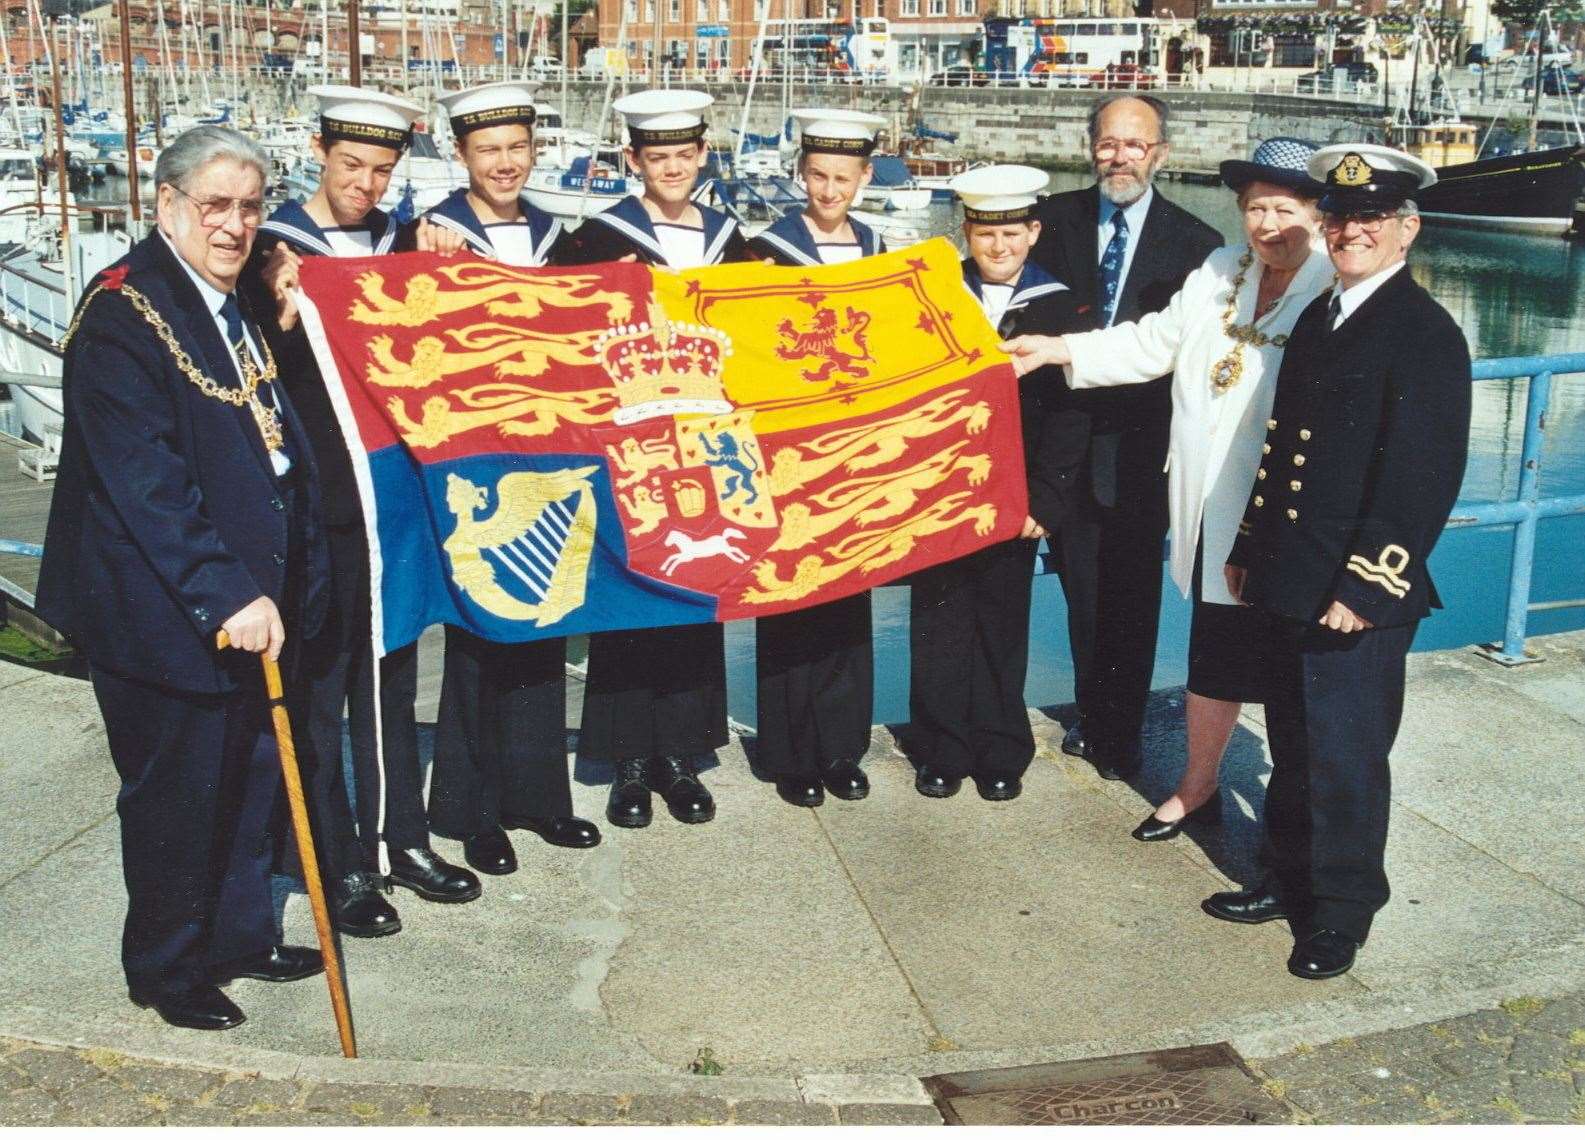 Ramsgate and Broadstairs Sea Cadets, with the Mayors of Ramsgate and Broadstairs, raise the Royal Standard of George IV which happens three times a year in Ramsgate. Undated file picture